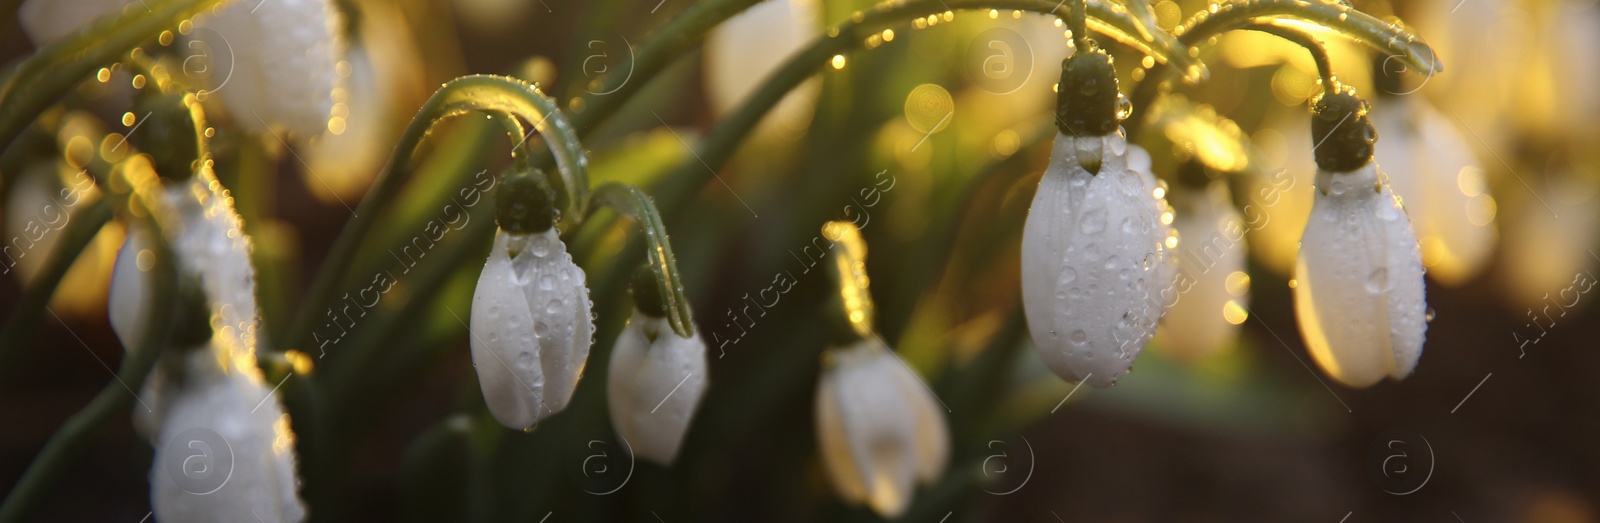 Image of Closeup view of beautiful snowdrops growing outdoors, banner design. First spring flowers